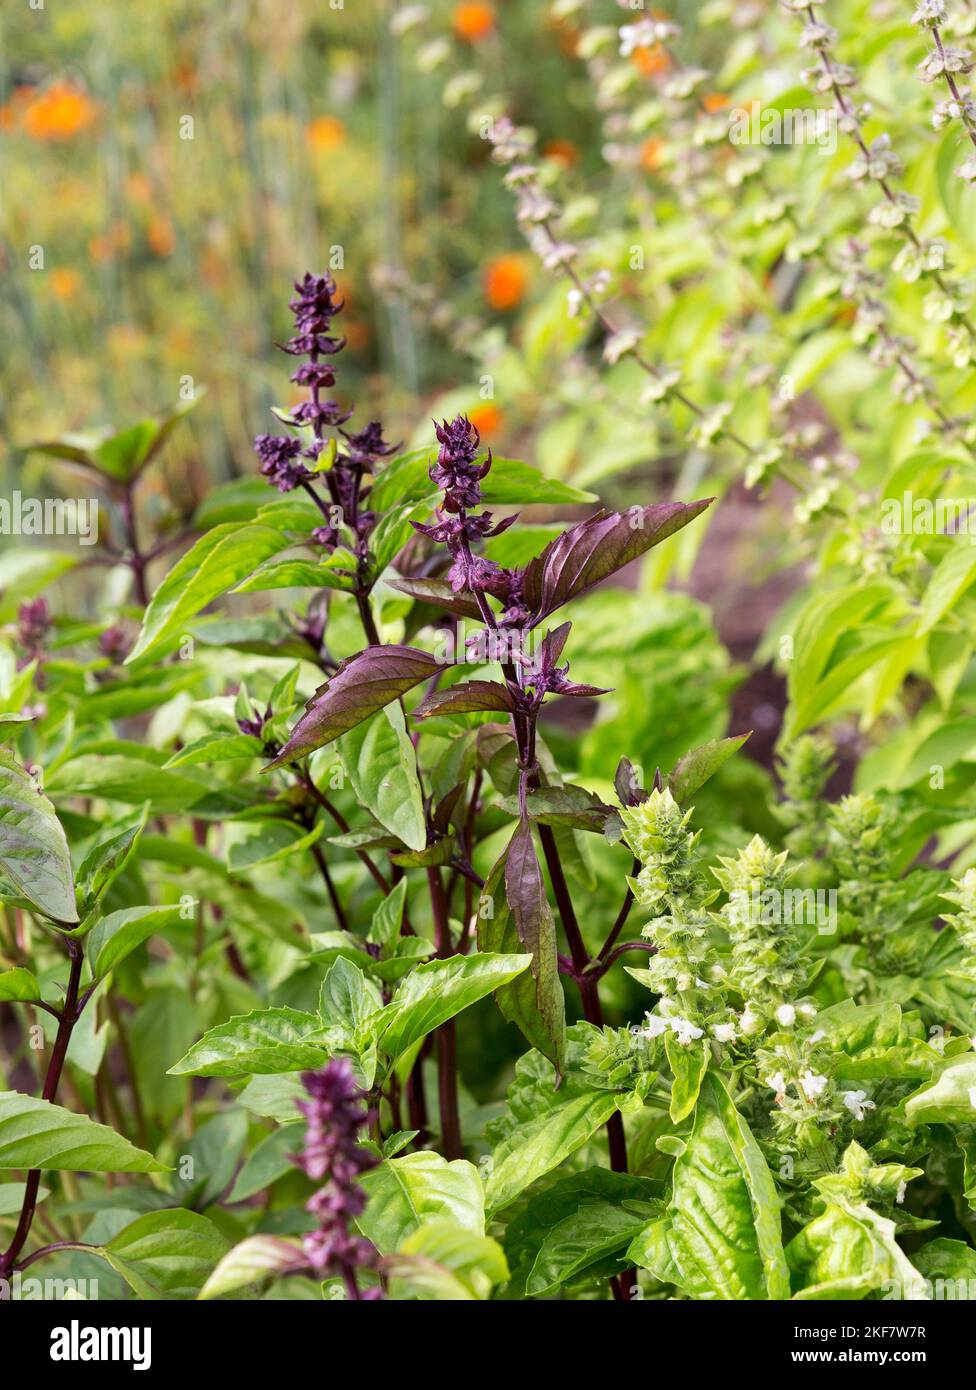 Basil plants with flowers growing. Kinds of basil (green, purple) Stock Photo